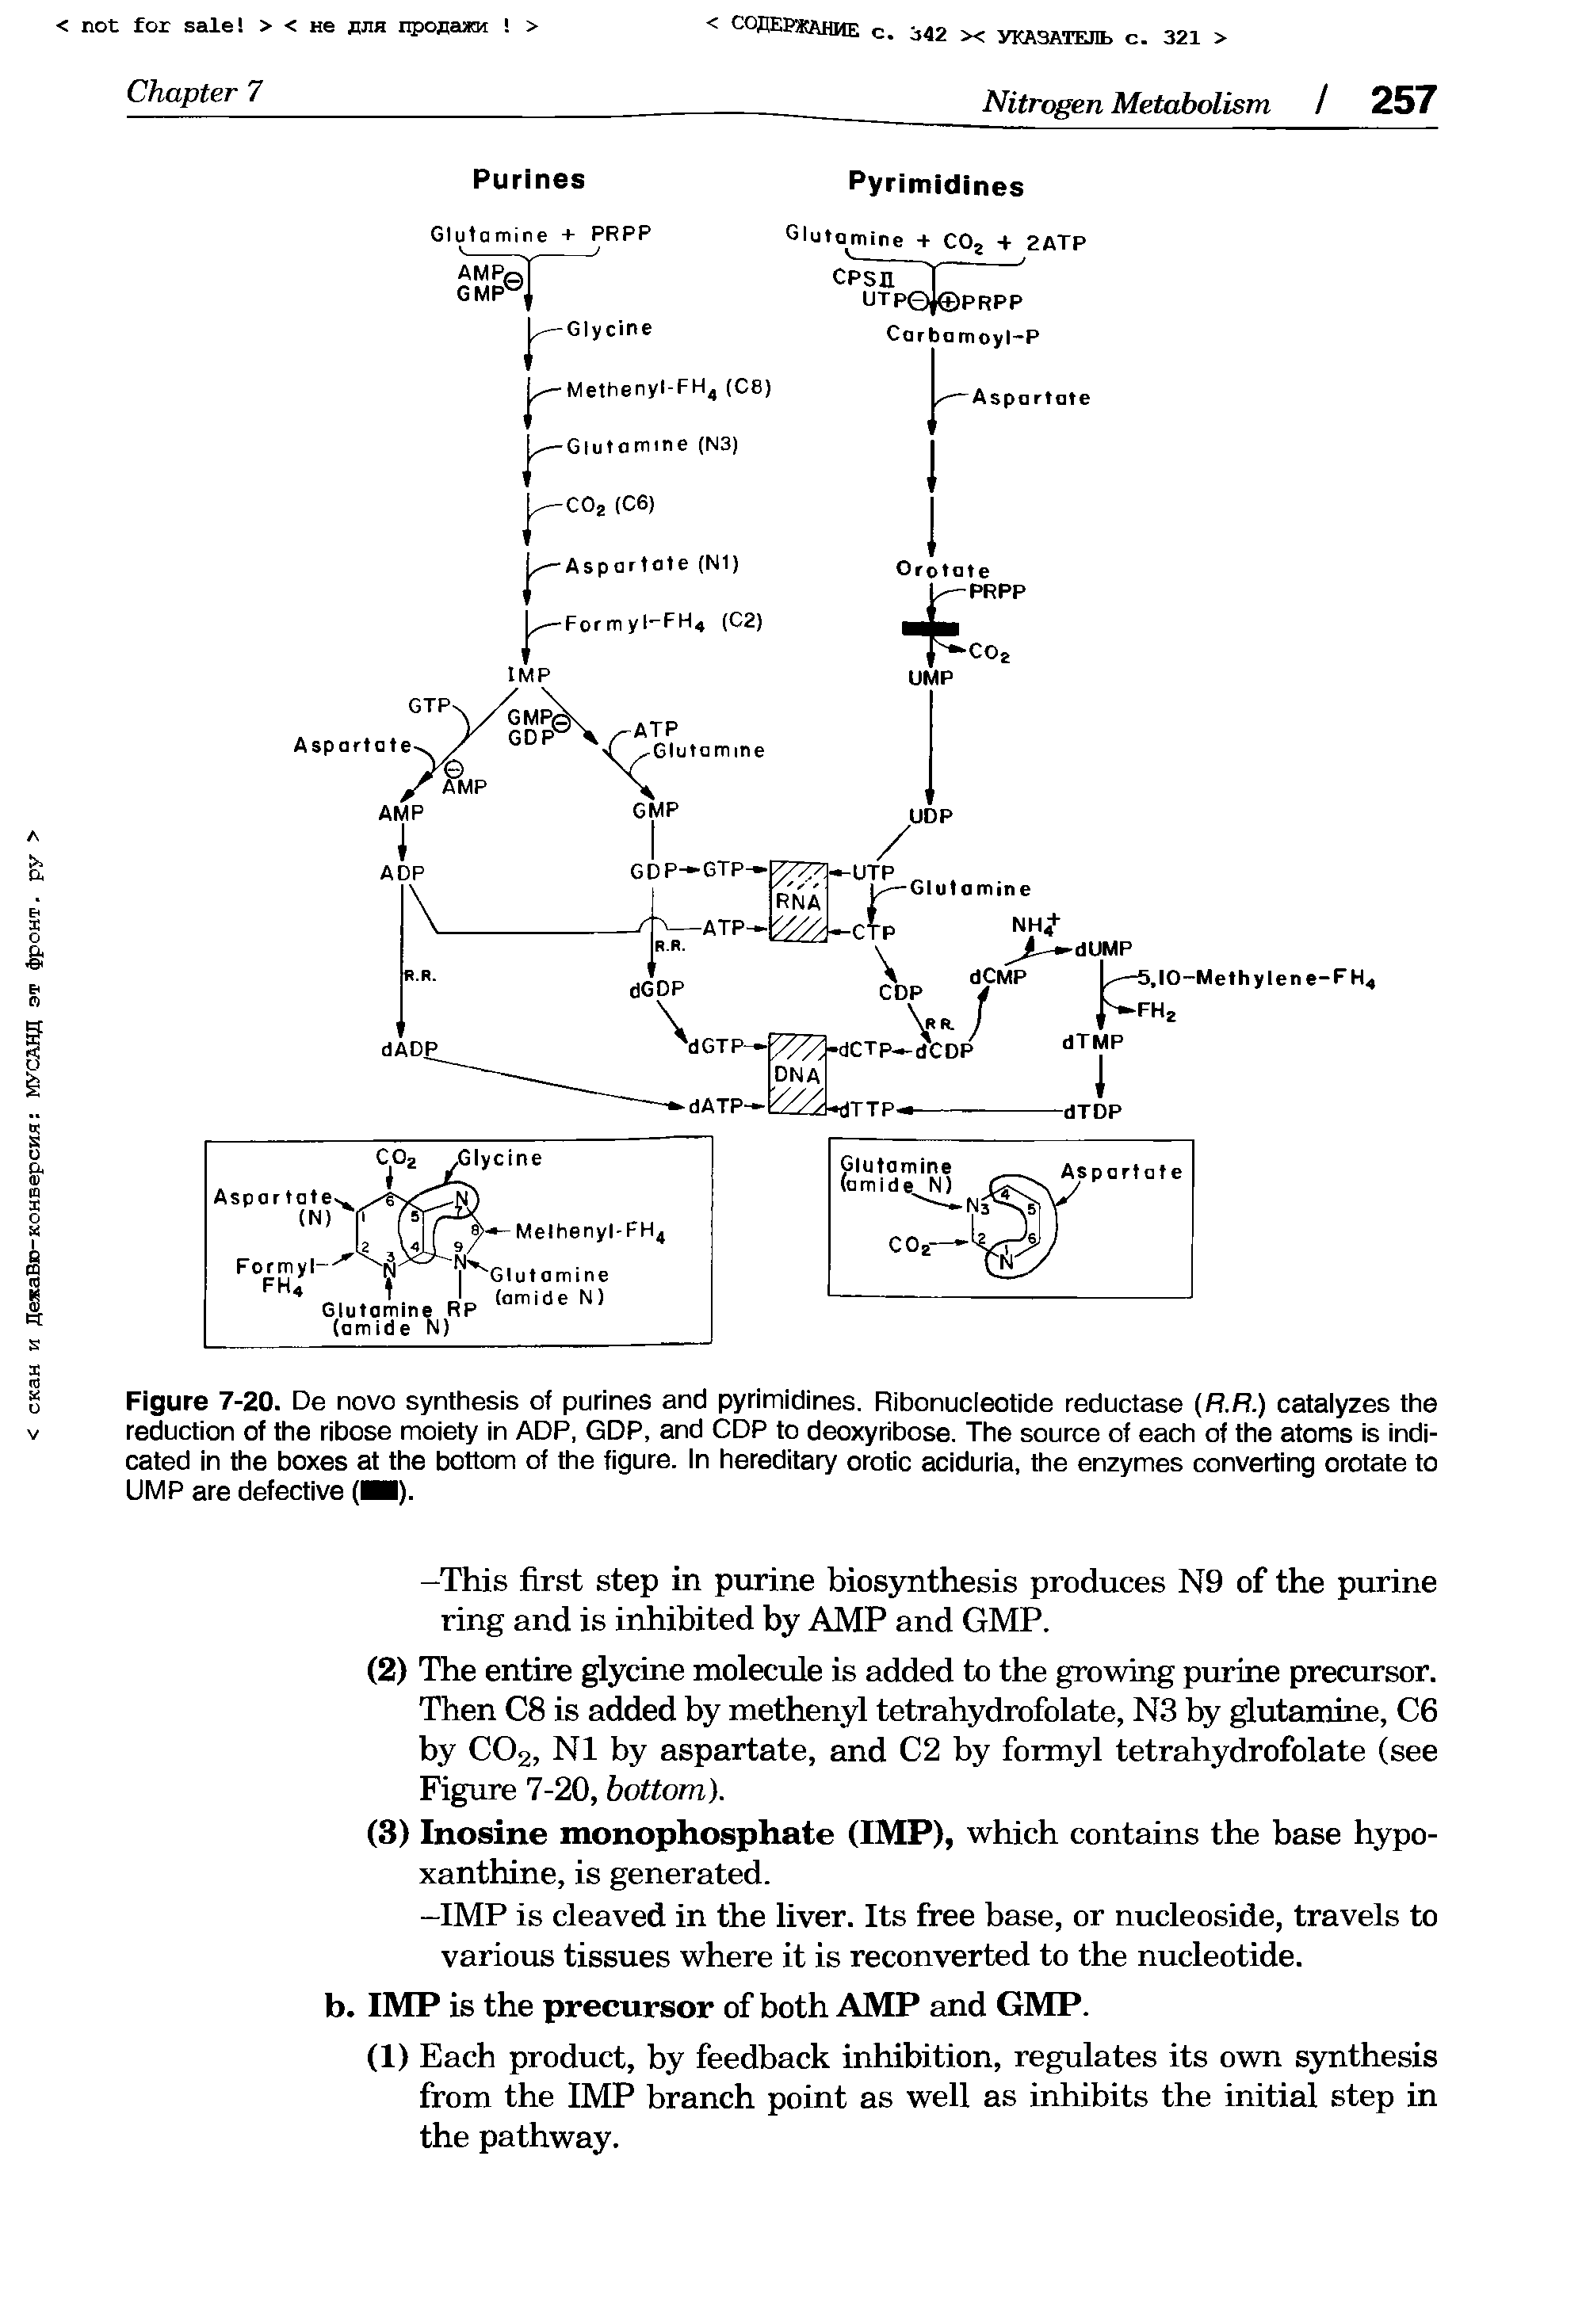 Figure 7-20. De novo synthesis of purines and pyrimidines. Ribonucleotide reductase (R.R.) catalyzes the reduction of the ribose moiety in ADP, GDP, and CDP to deoxyribose. The source of each of the atoms is indicated in the boxes at the bottom of the figure. In hereditary orotic aciduria, the enzymes converting orotate to UMP are defective ( ).